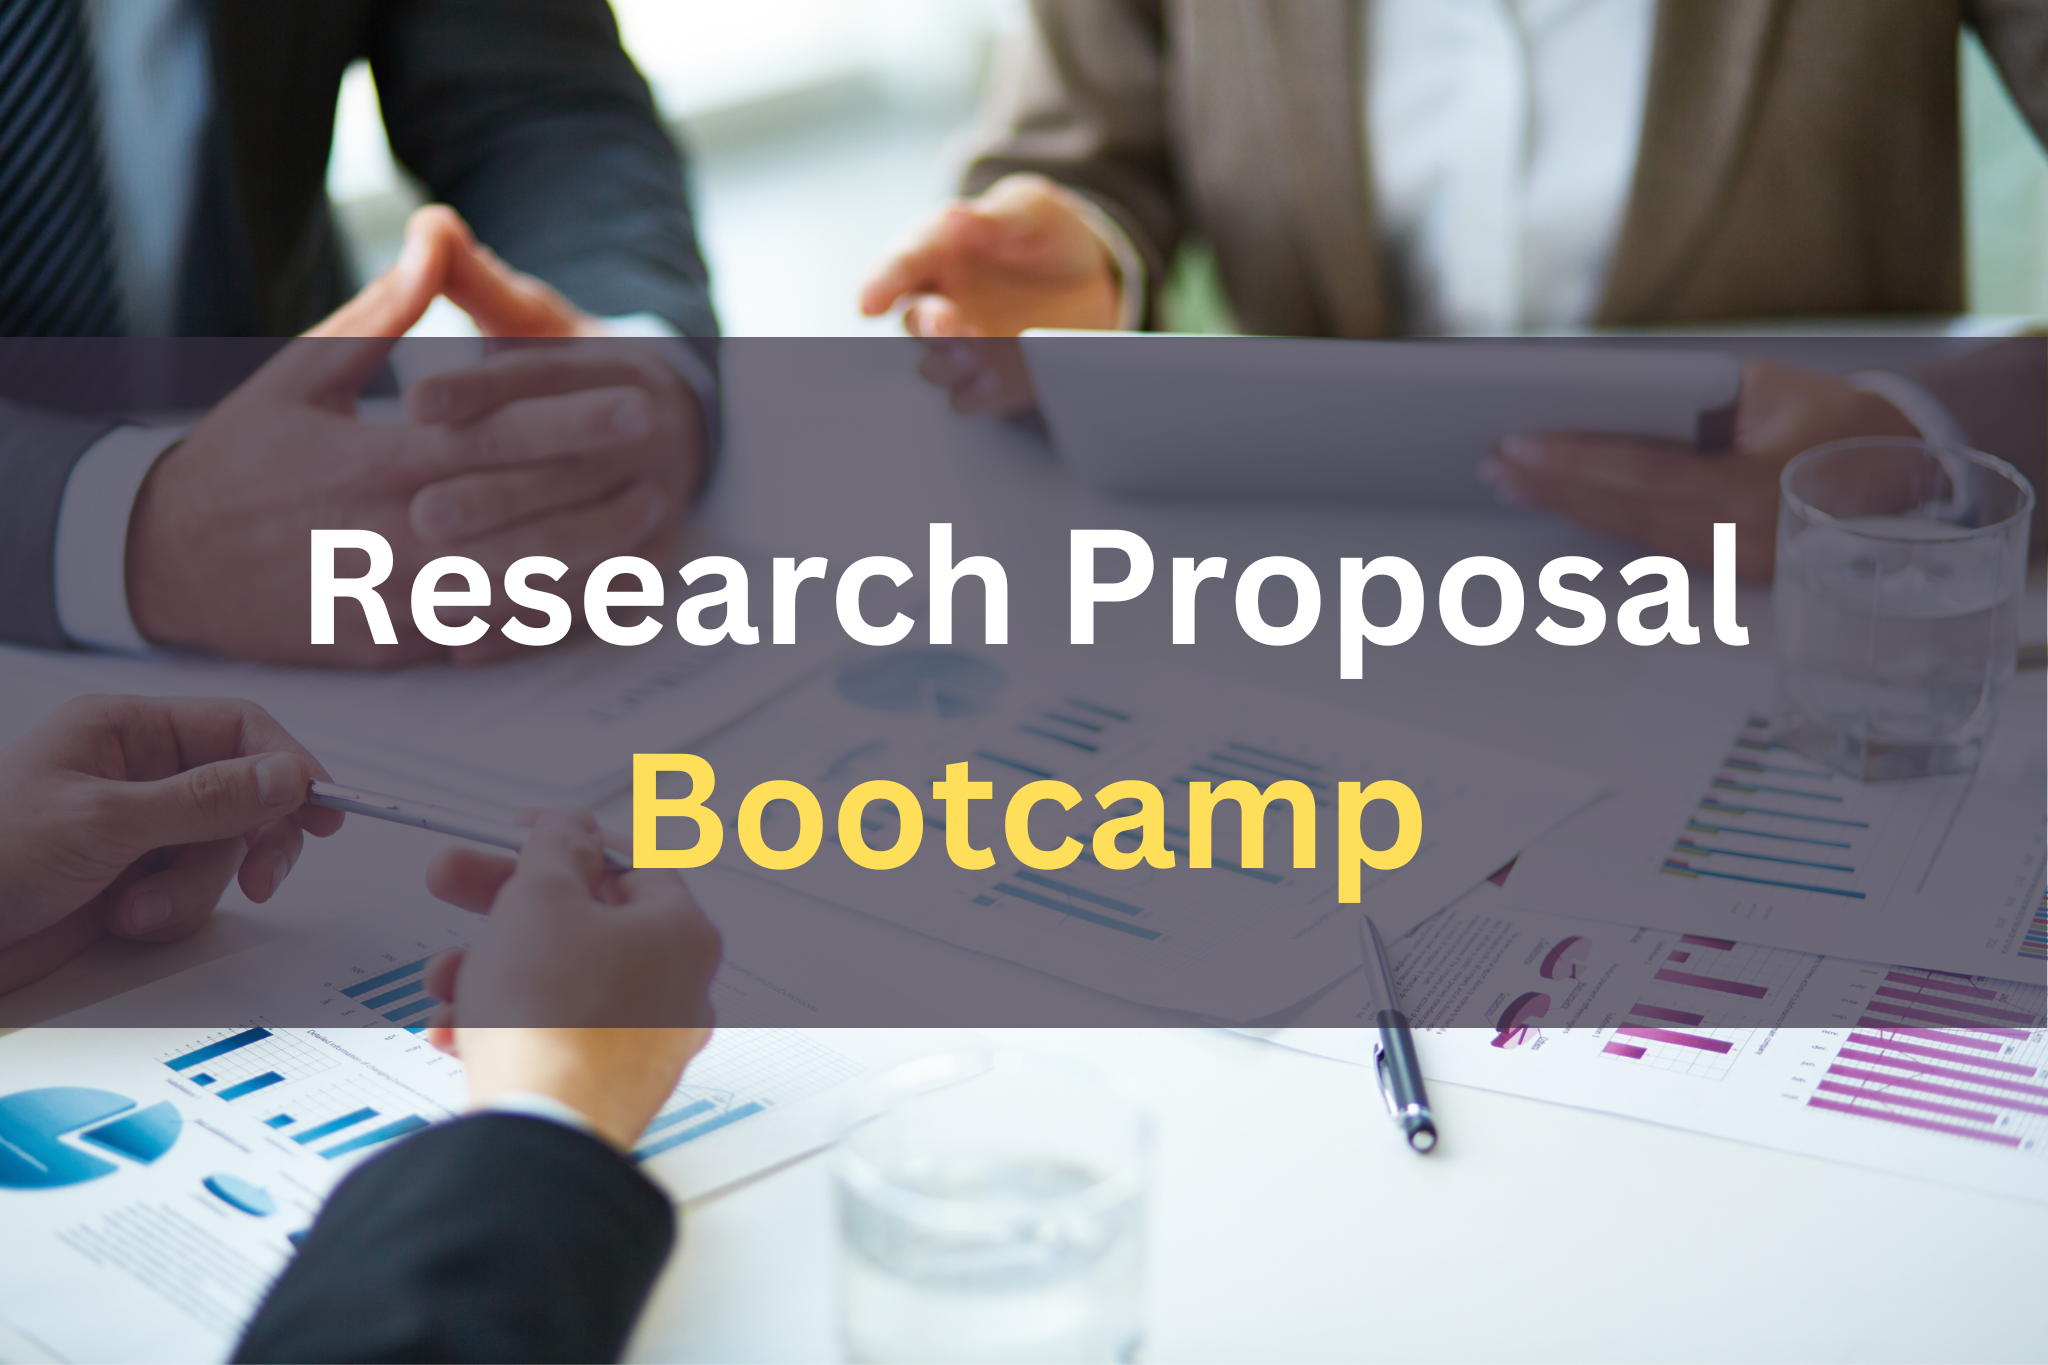 Research Proposal Bootcamp